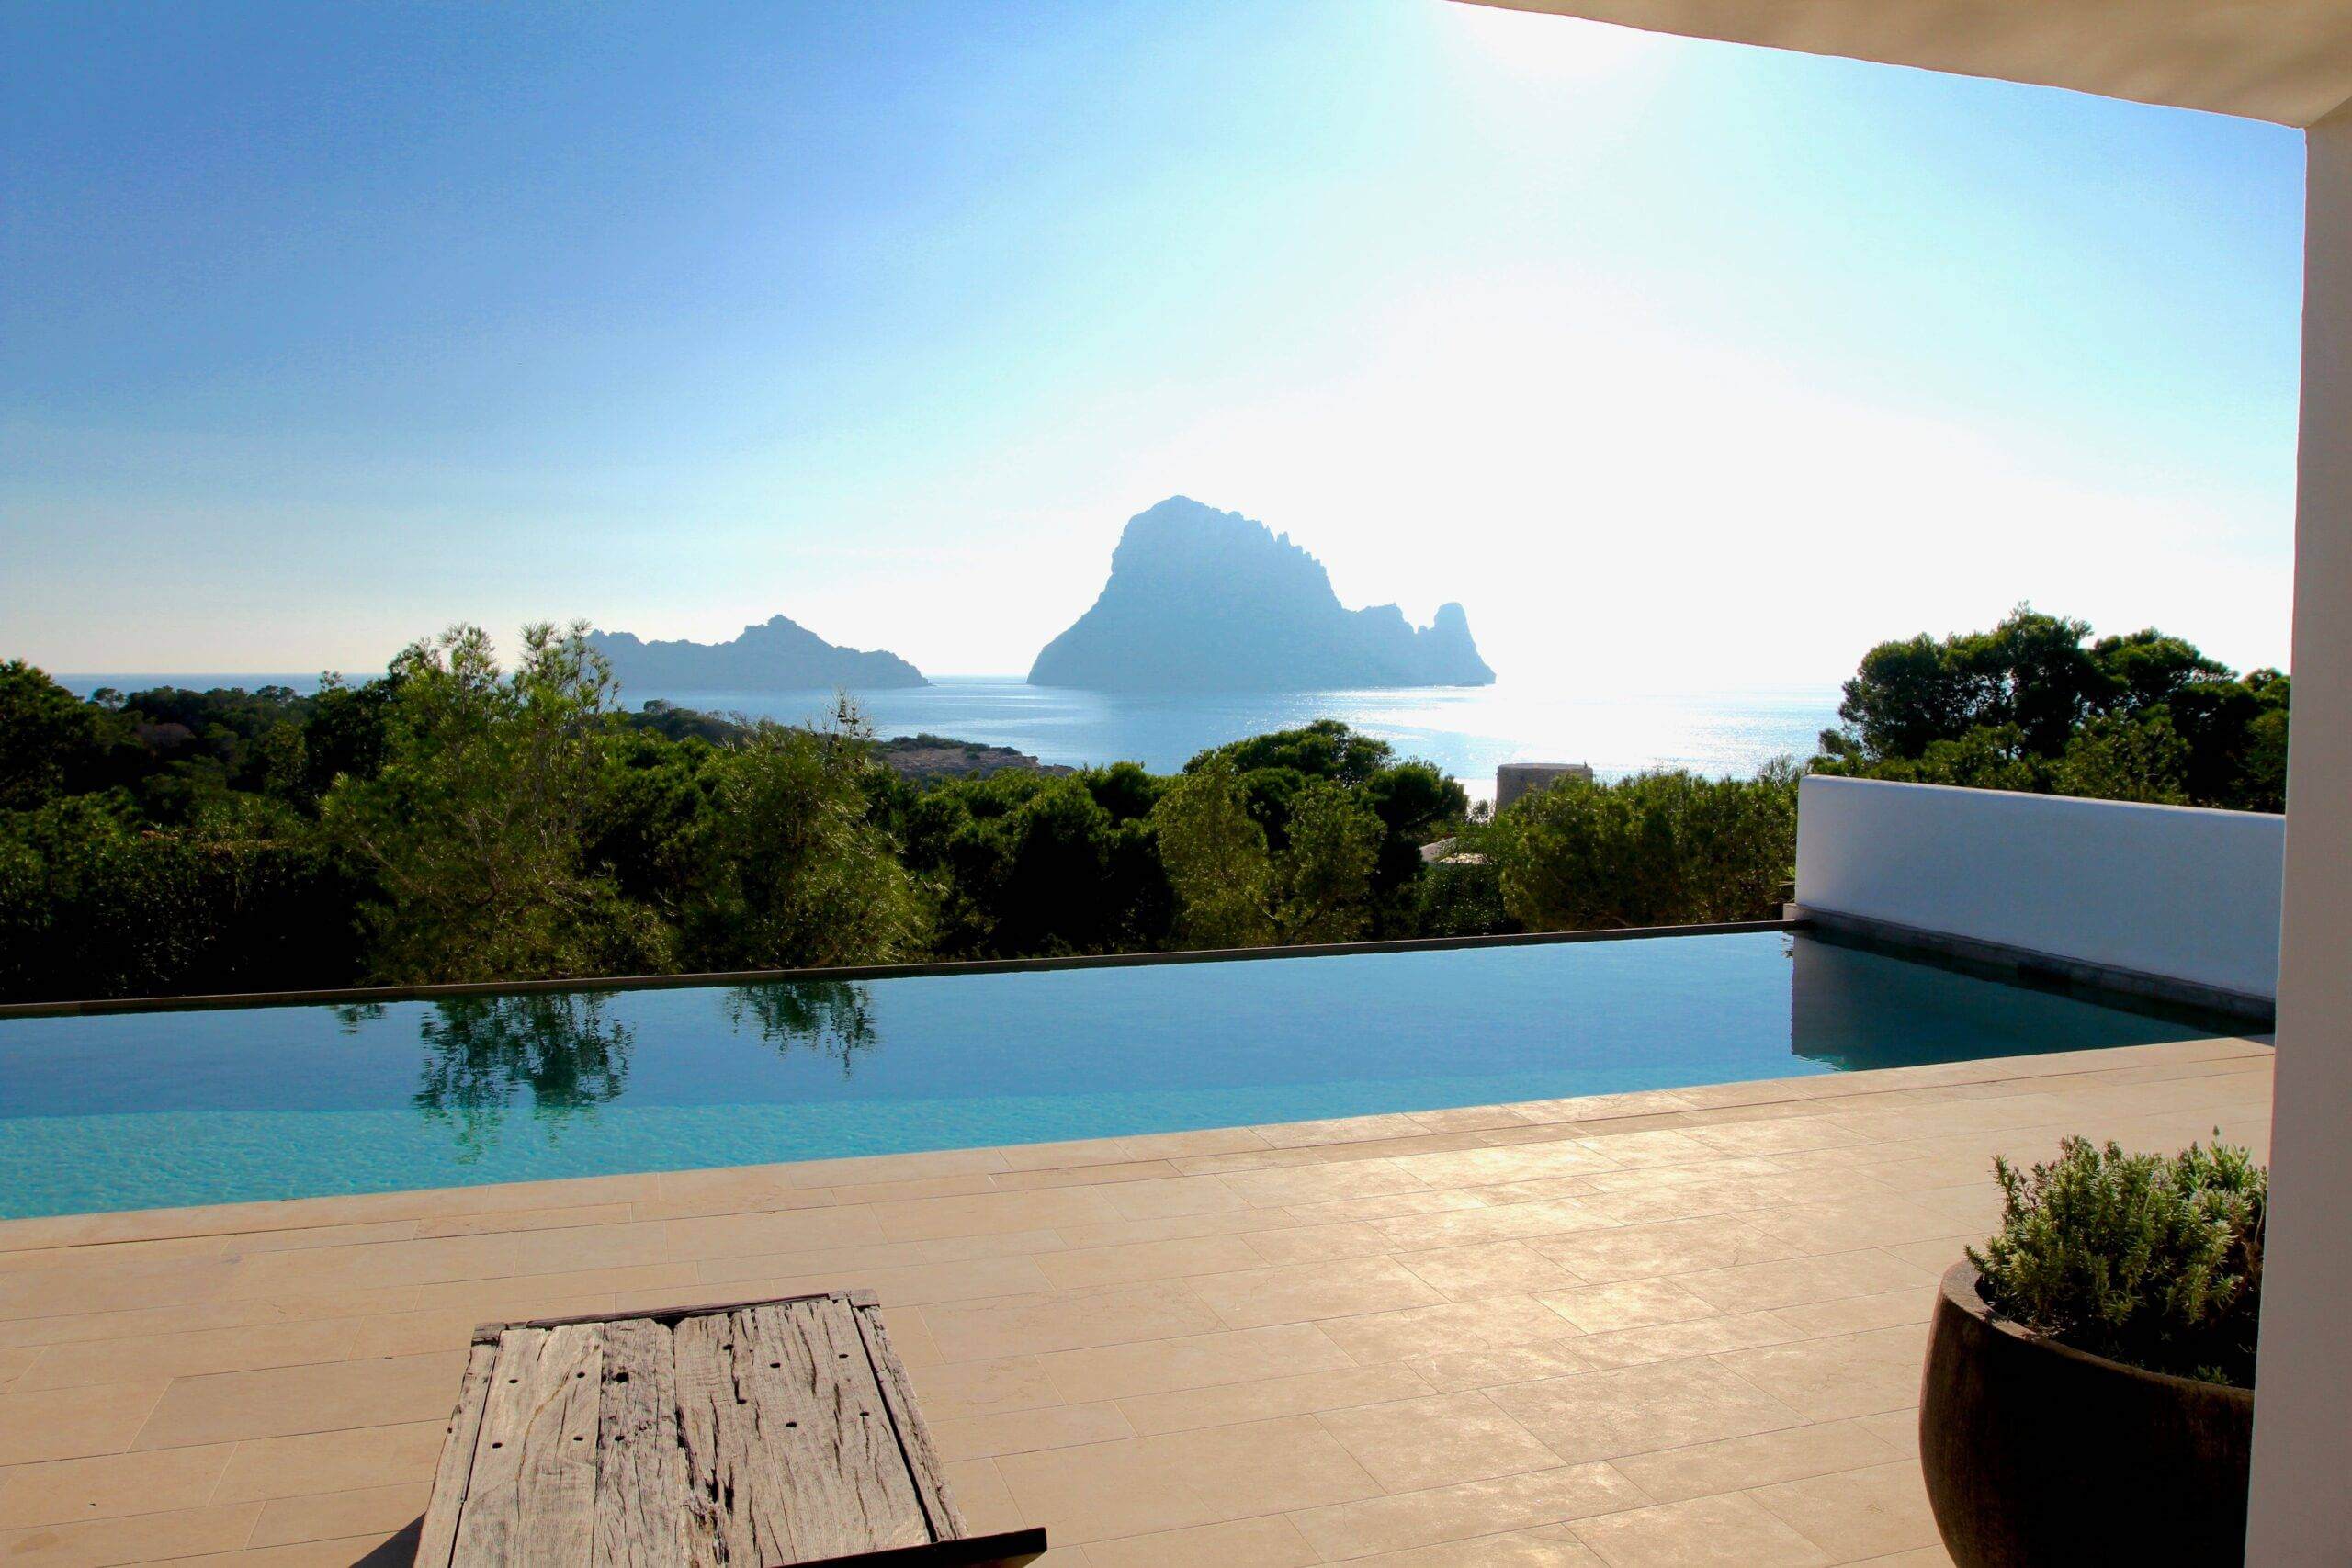 You are currently viewing Villa Viviana “Luxurious modern villa overlooking Es Vedra .”